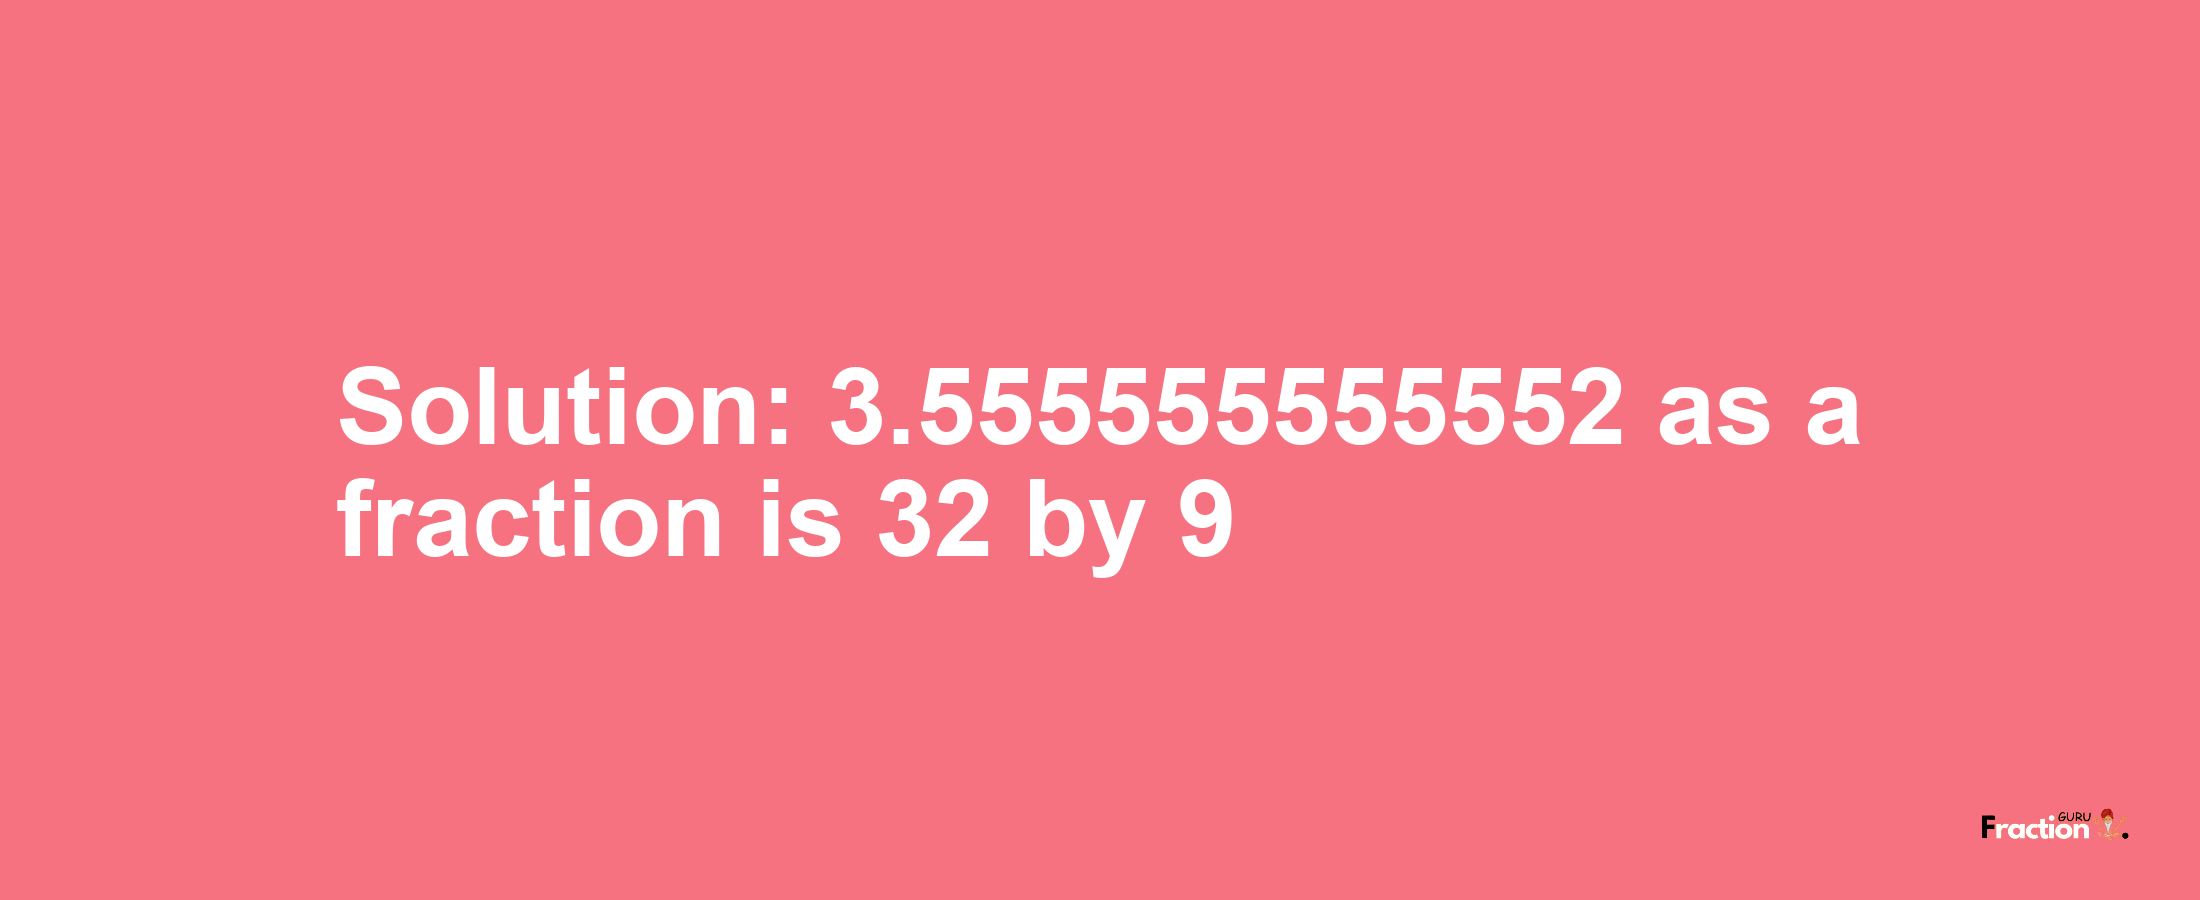 Solution:3.555555555552 as a fraction is 32/9